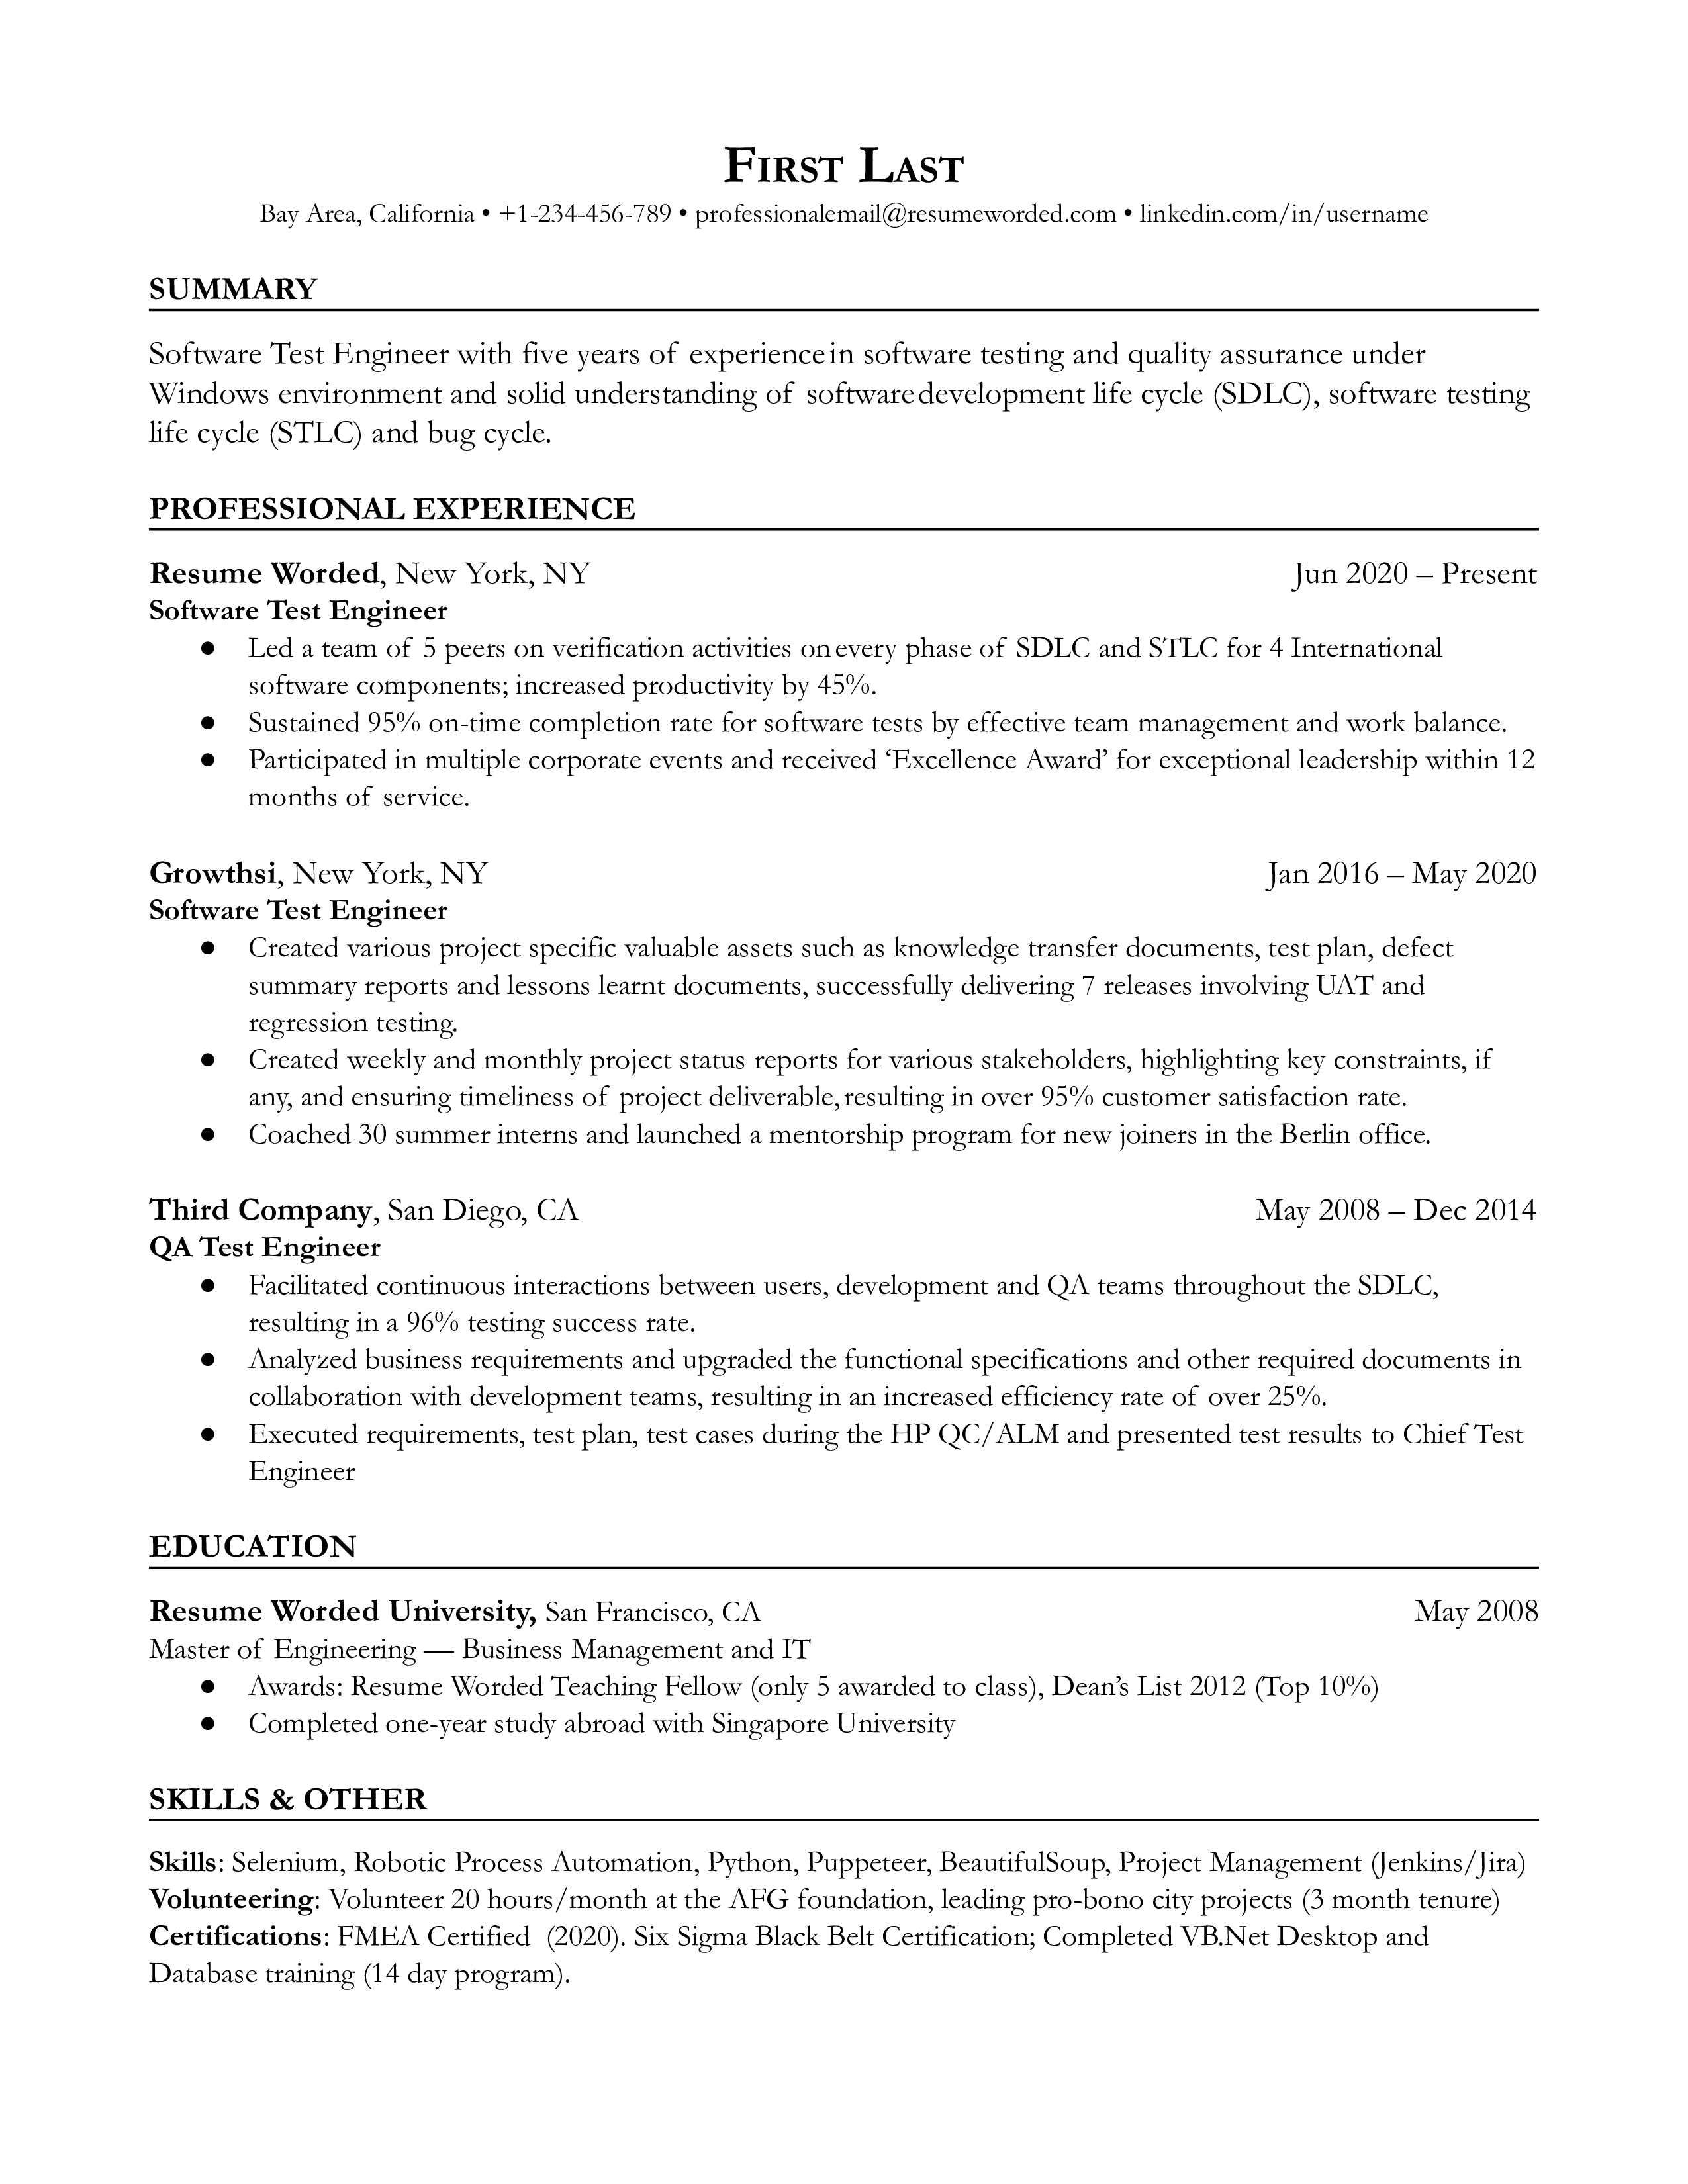 Software Test Engineer Resume Template + Example